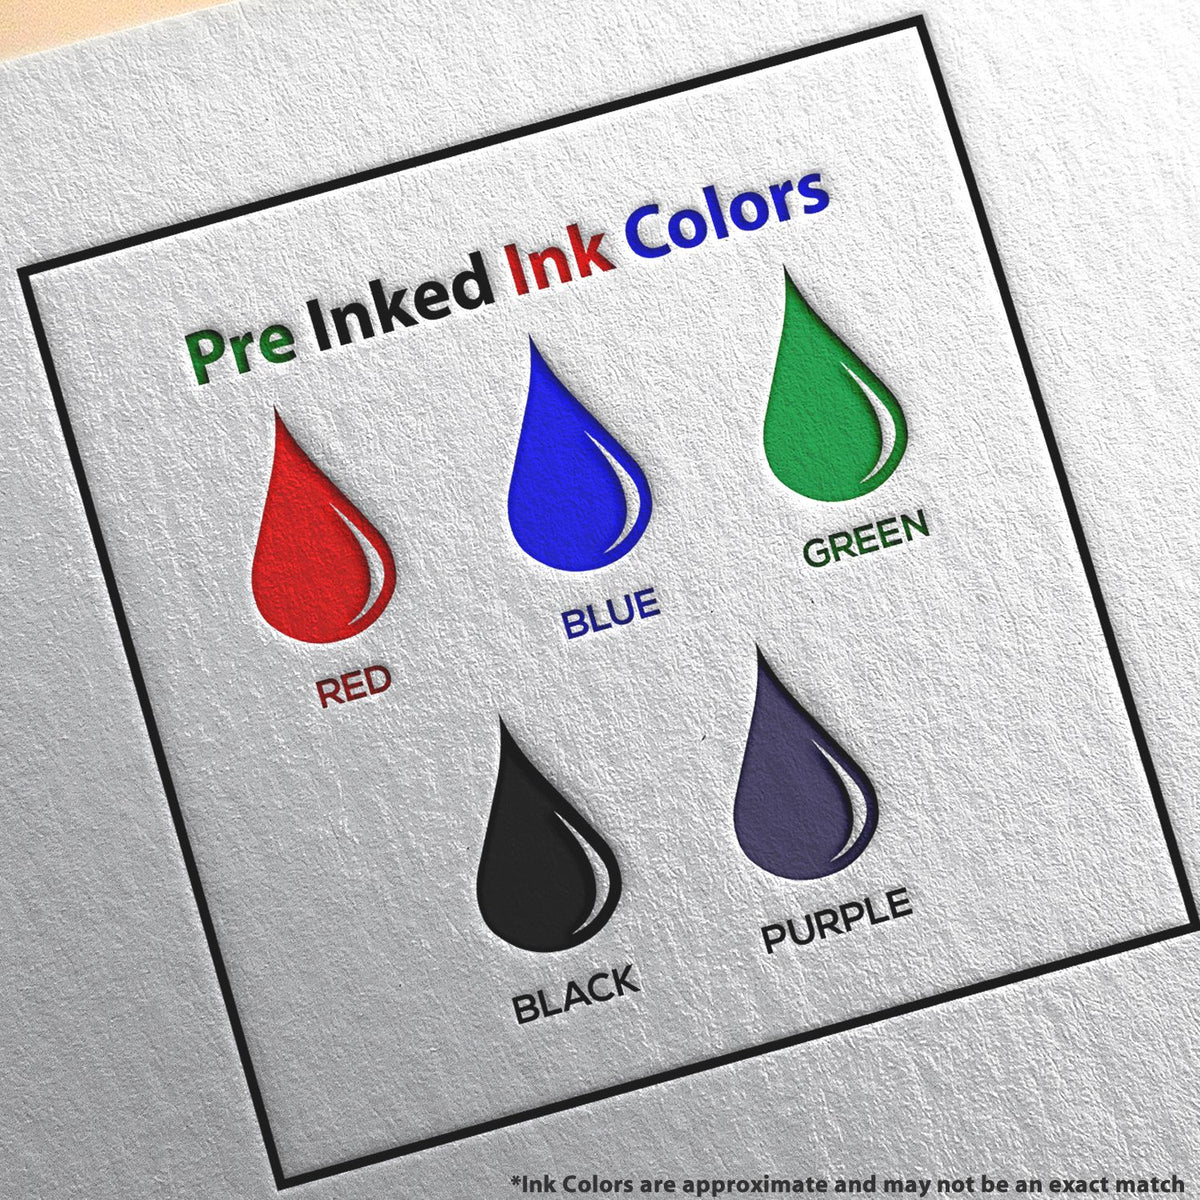 A picture showing the different ink colors or hues available for the Premium MaxLight Pre-Inked Georgia Landscape Architectural Stamp product.